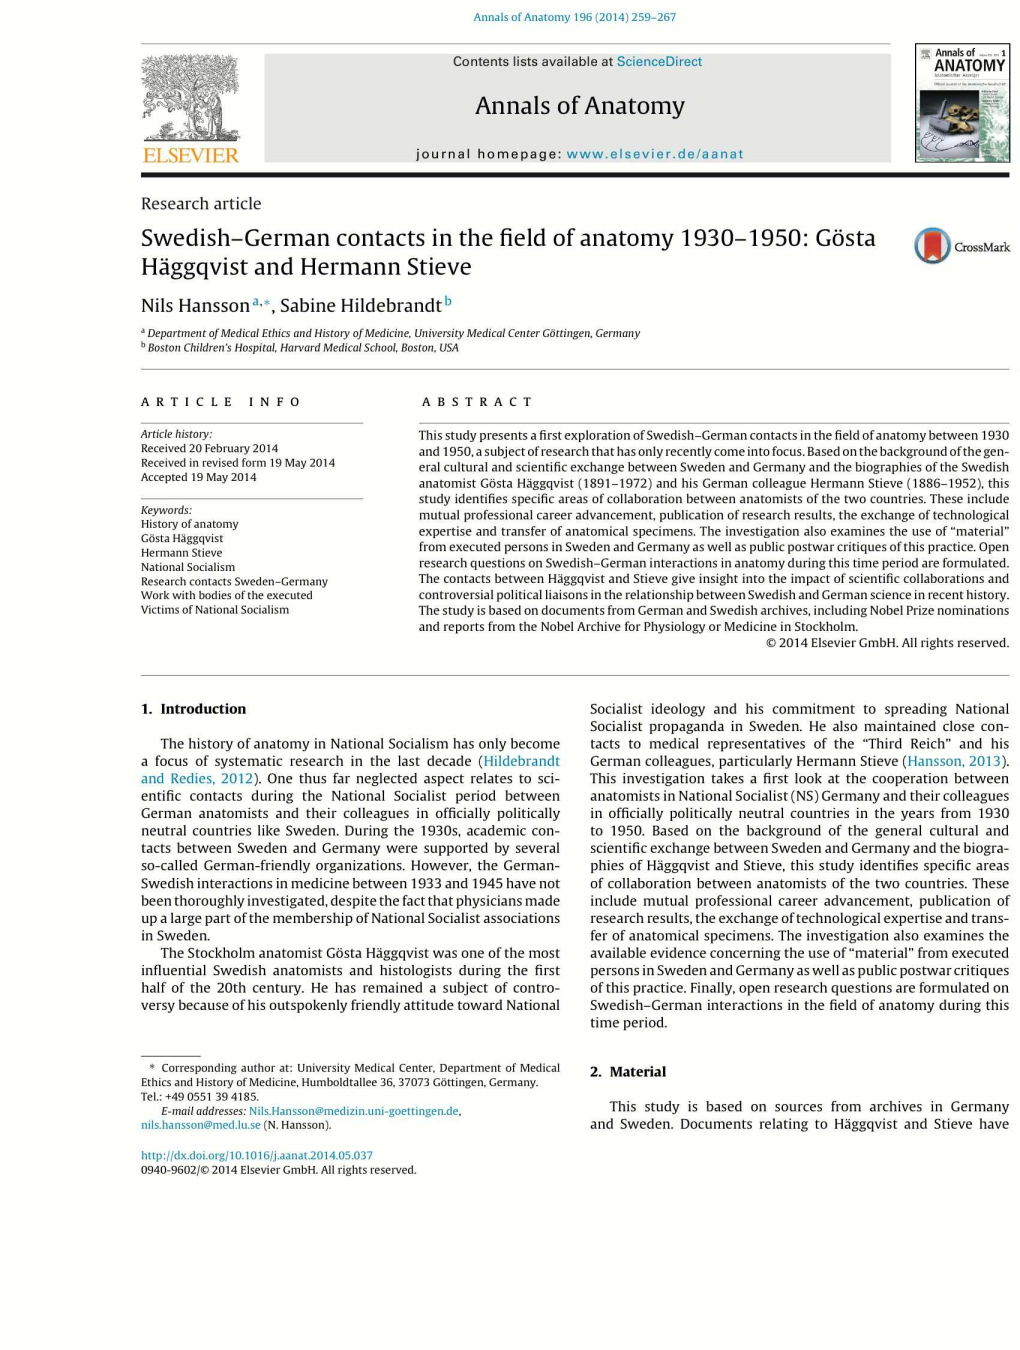 Swedish-German Contacts in the Field of Anatomy 1930-1950